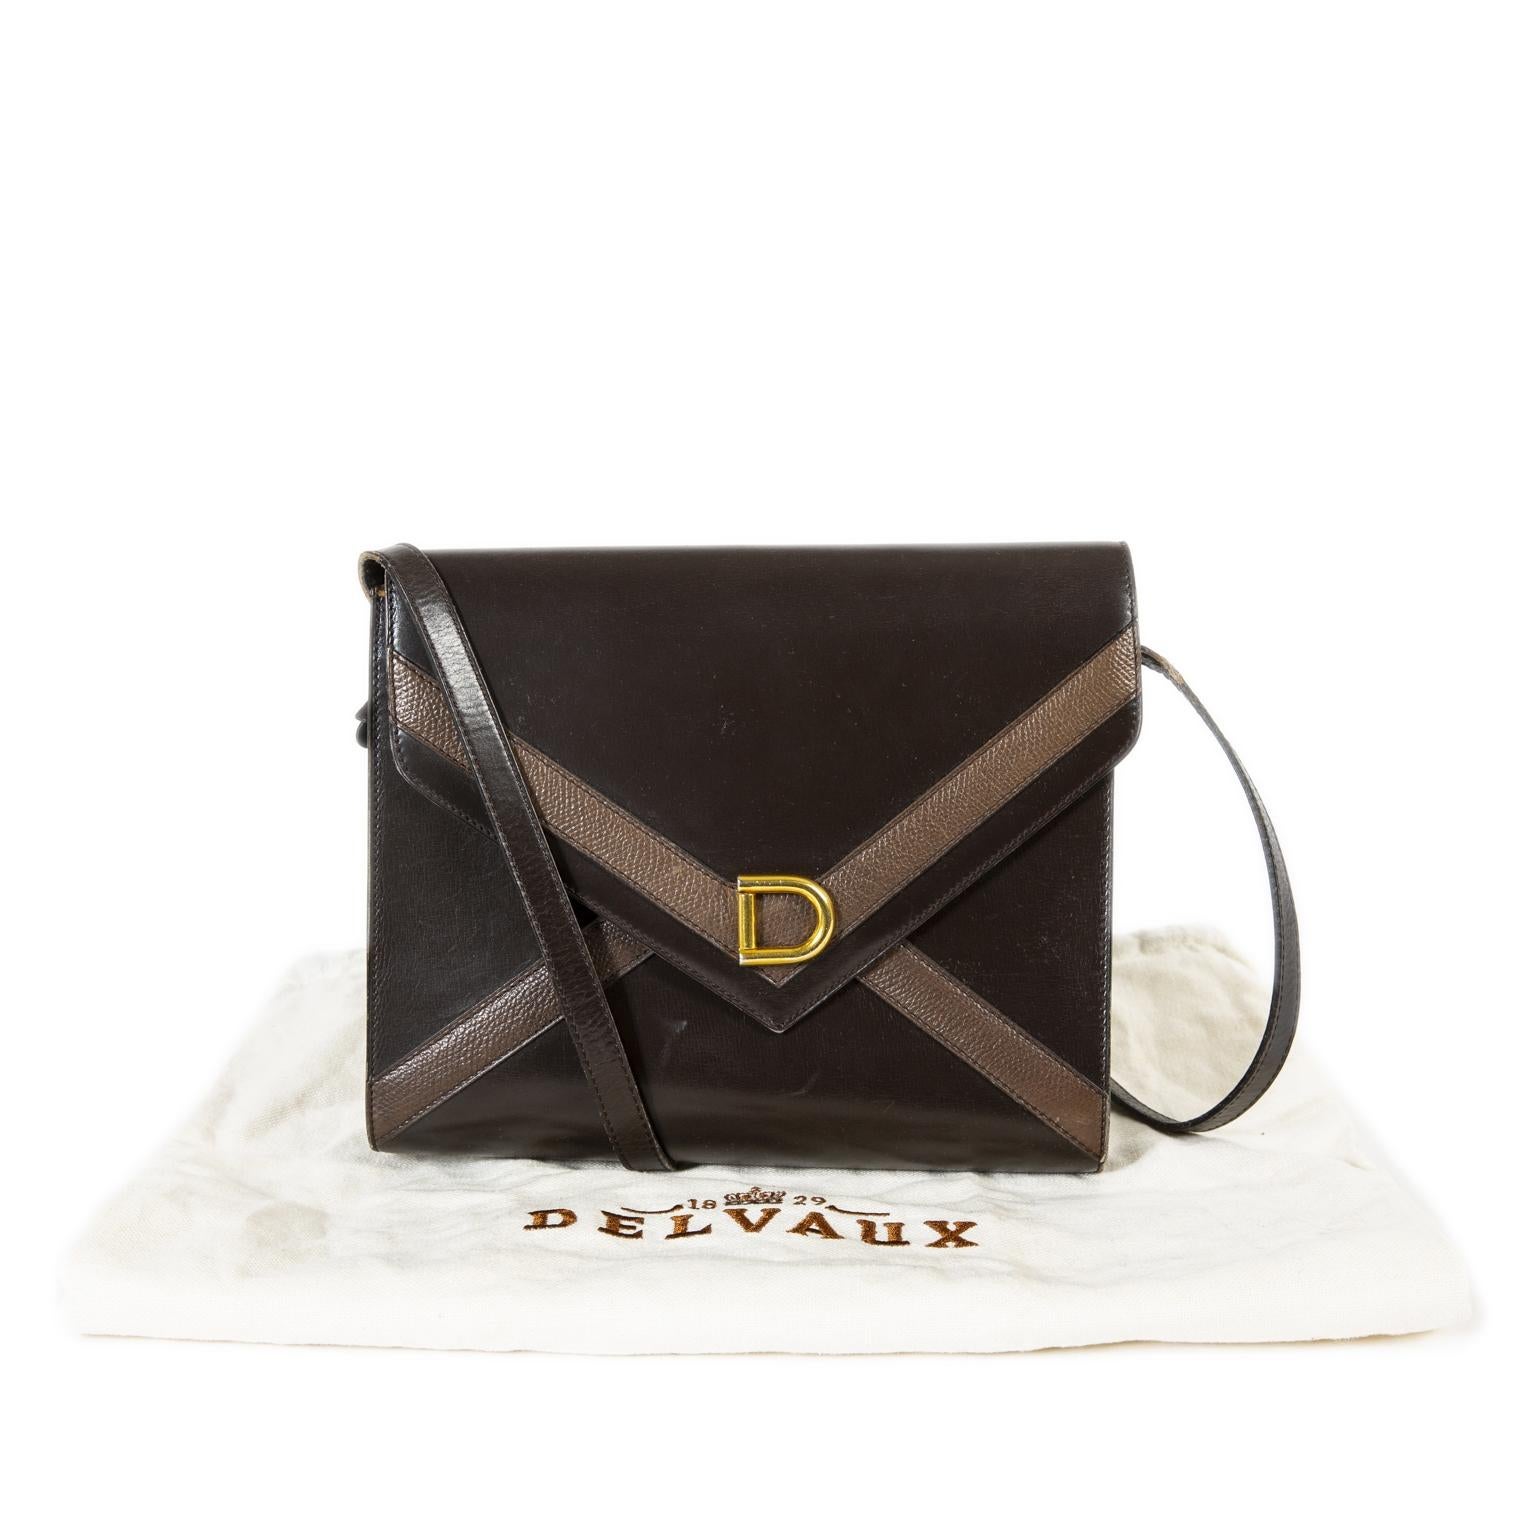 Very good preloved condition

Delvaux Brown Envelope Shoulder Bag

This beautiful Delvaux bag is crafted in brown smooth leather and features gold-toned details, including a gold-toned 'D' at the front.
The interior has one open pocket, perfect to